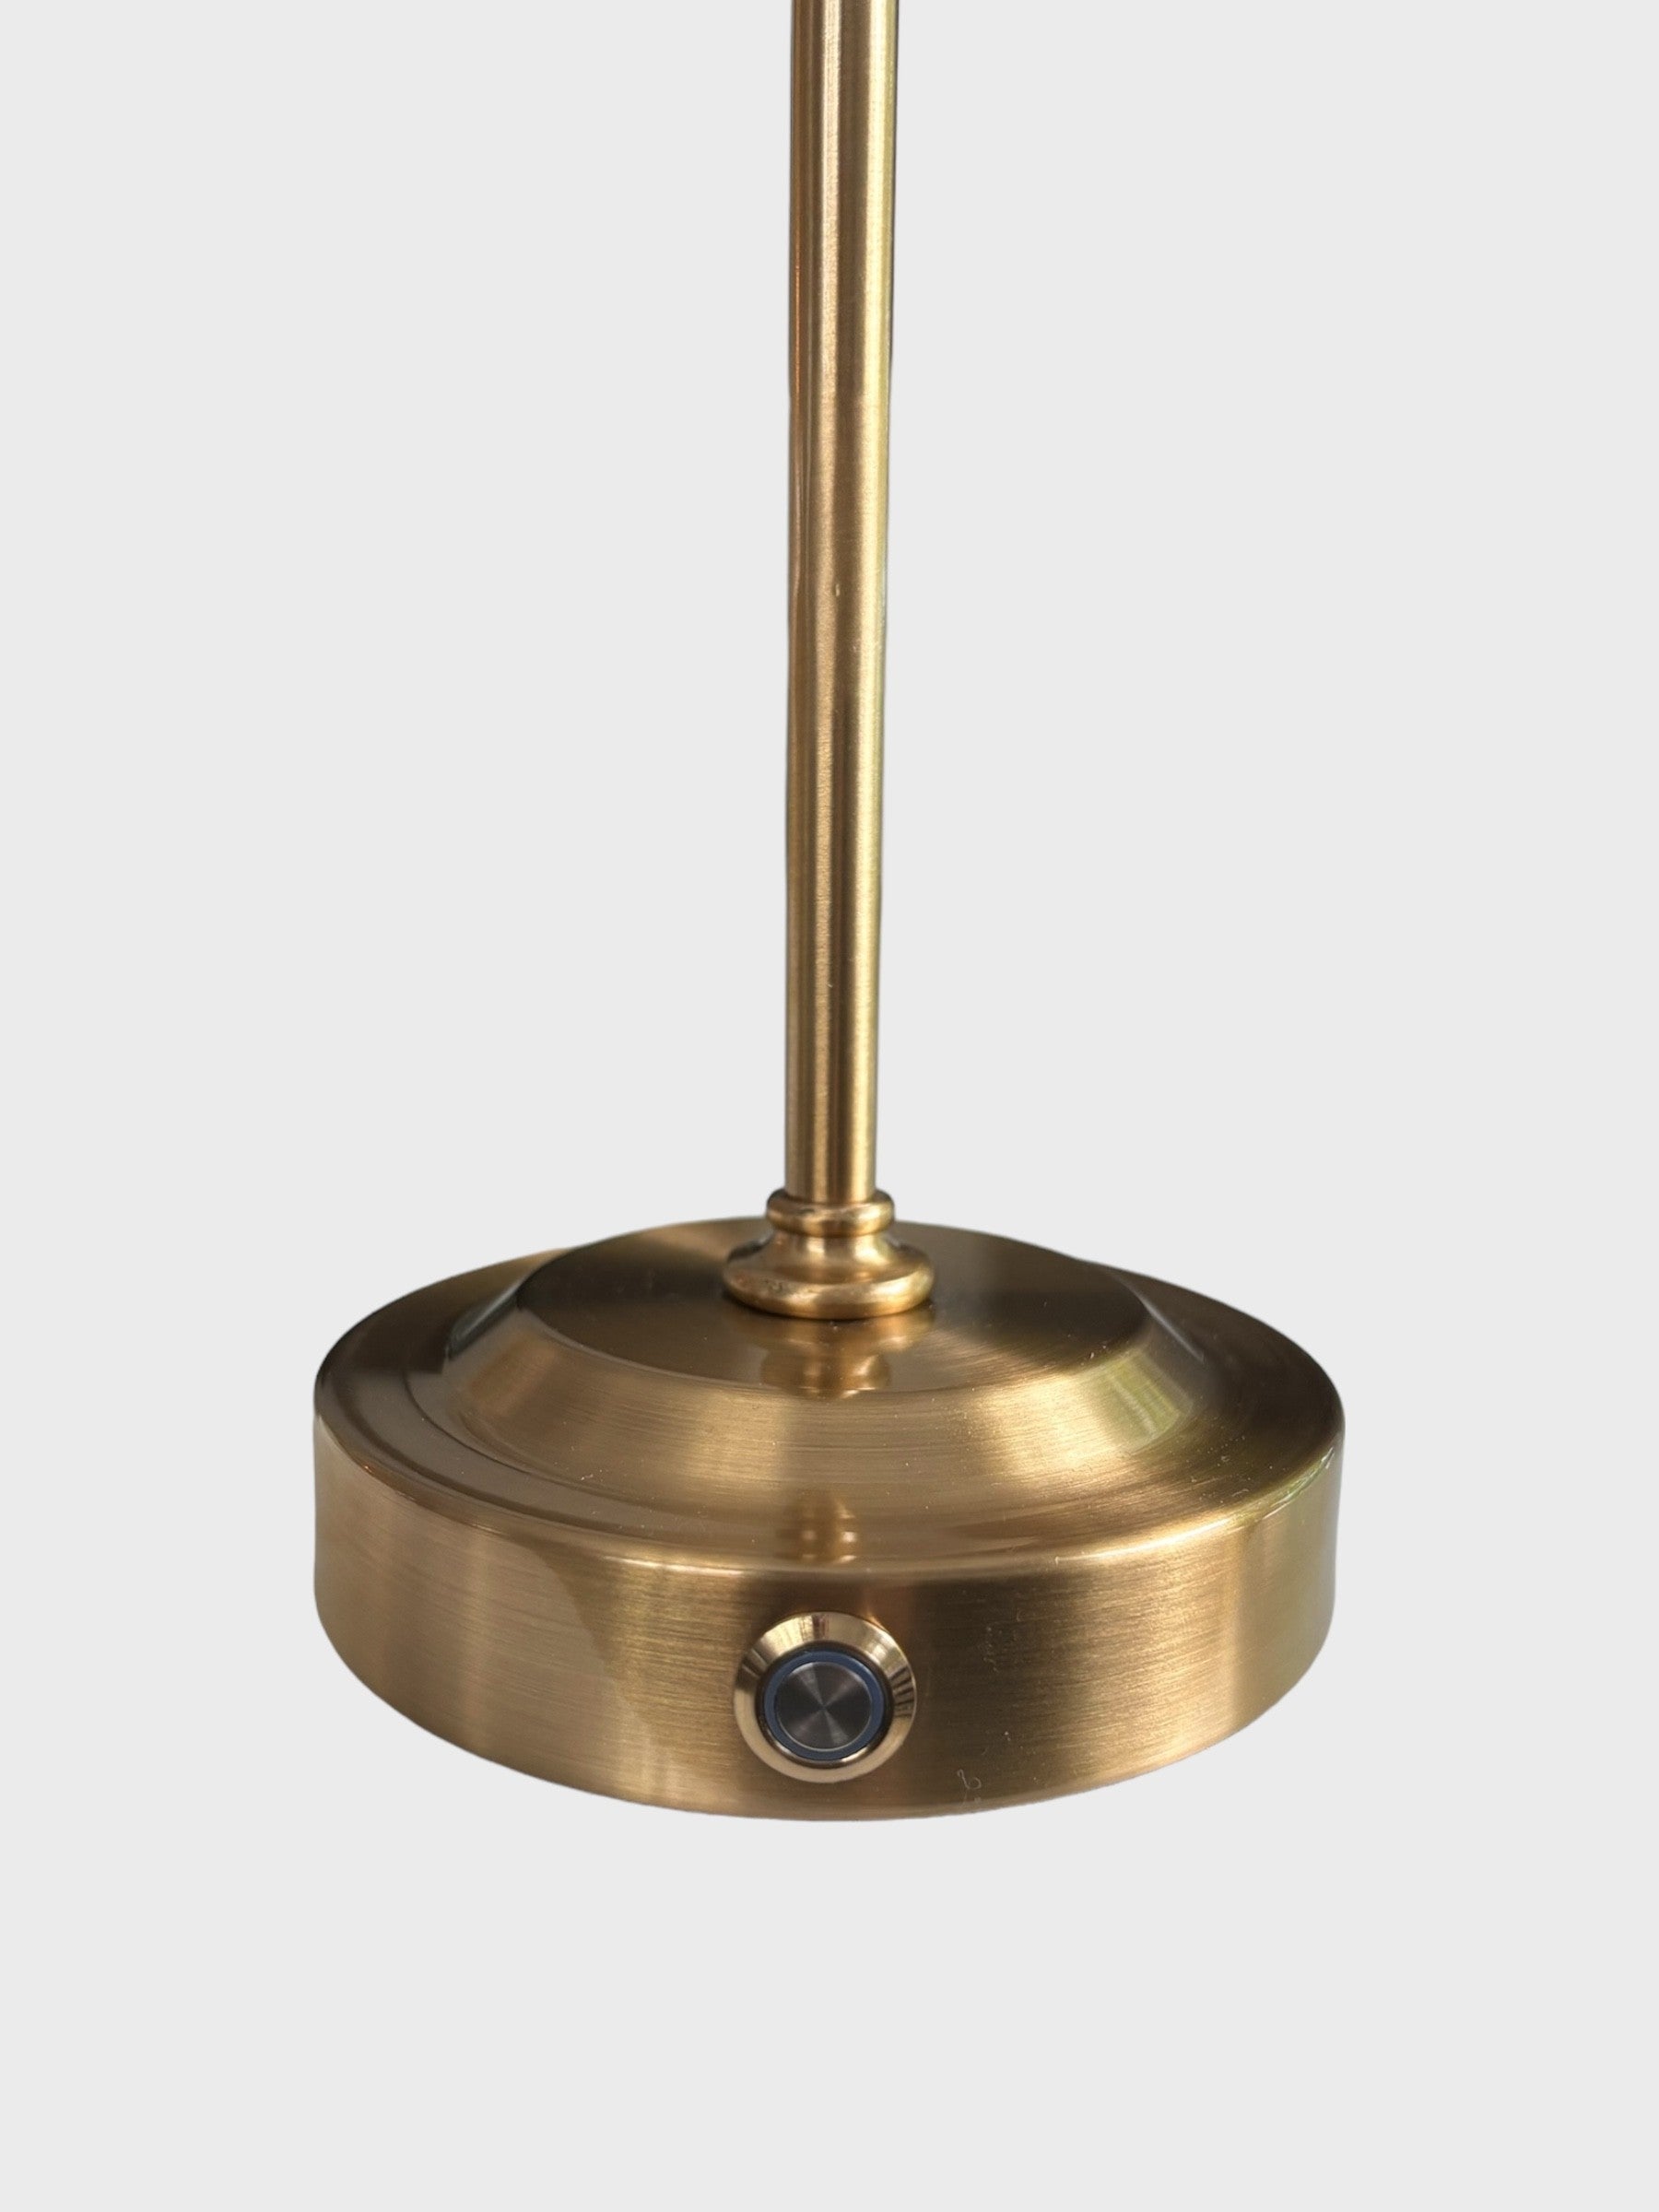 A close up of the brass finished lamp base of a rechargeable lamp showing the dimmer switch.